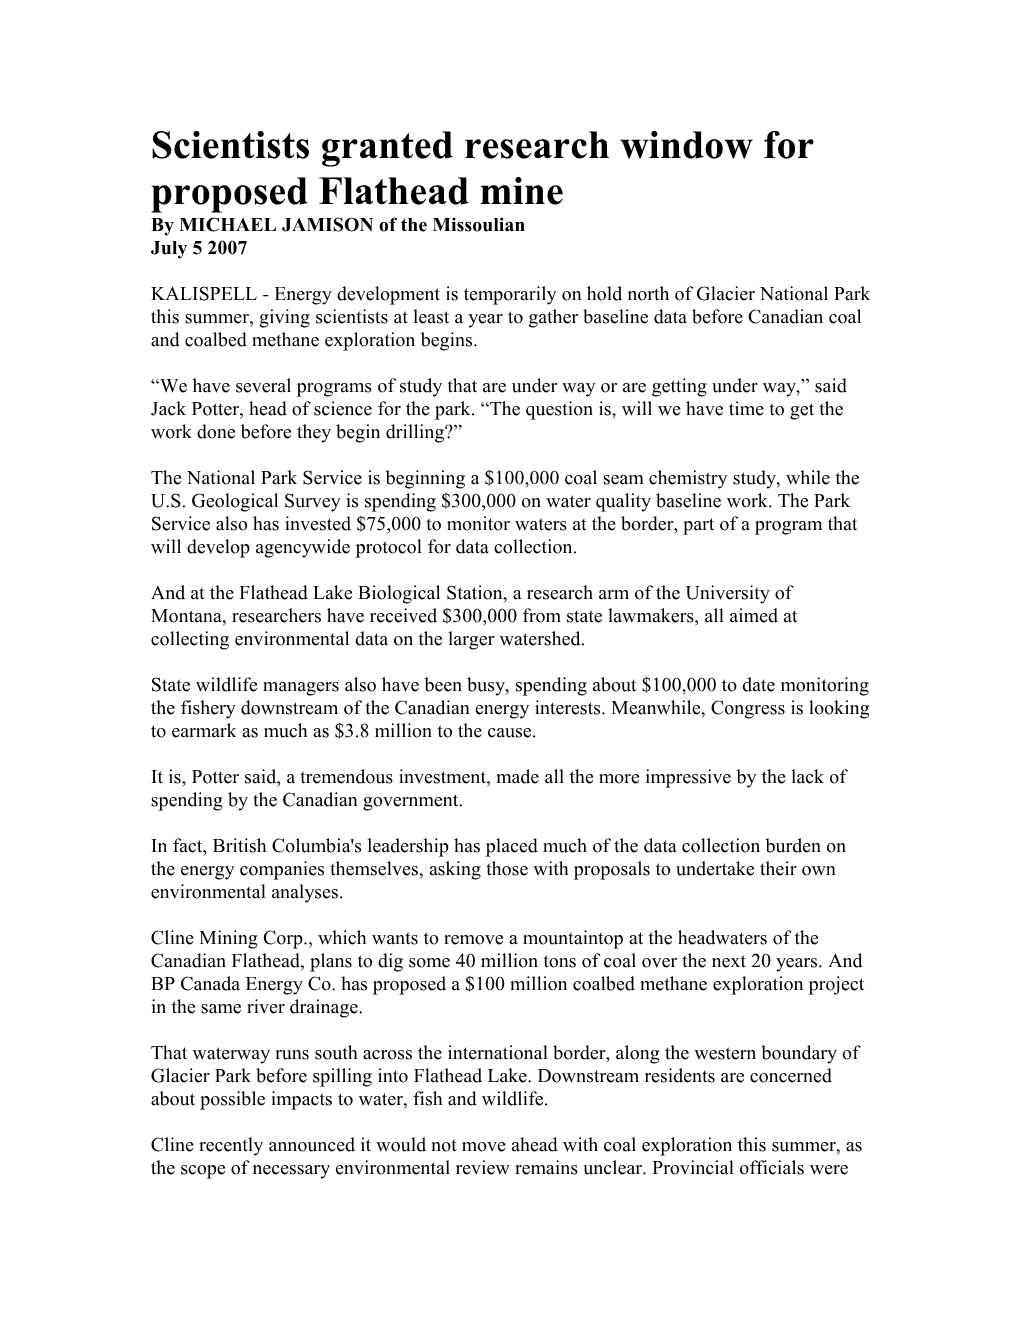 Scientists Granted Research Window for Proposed Flathead Mine